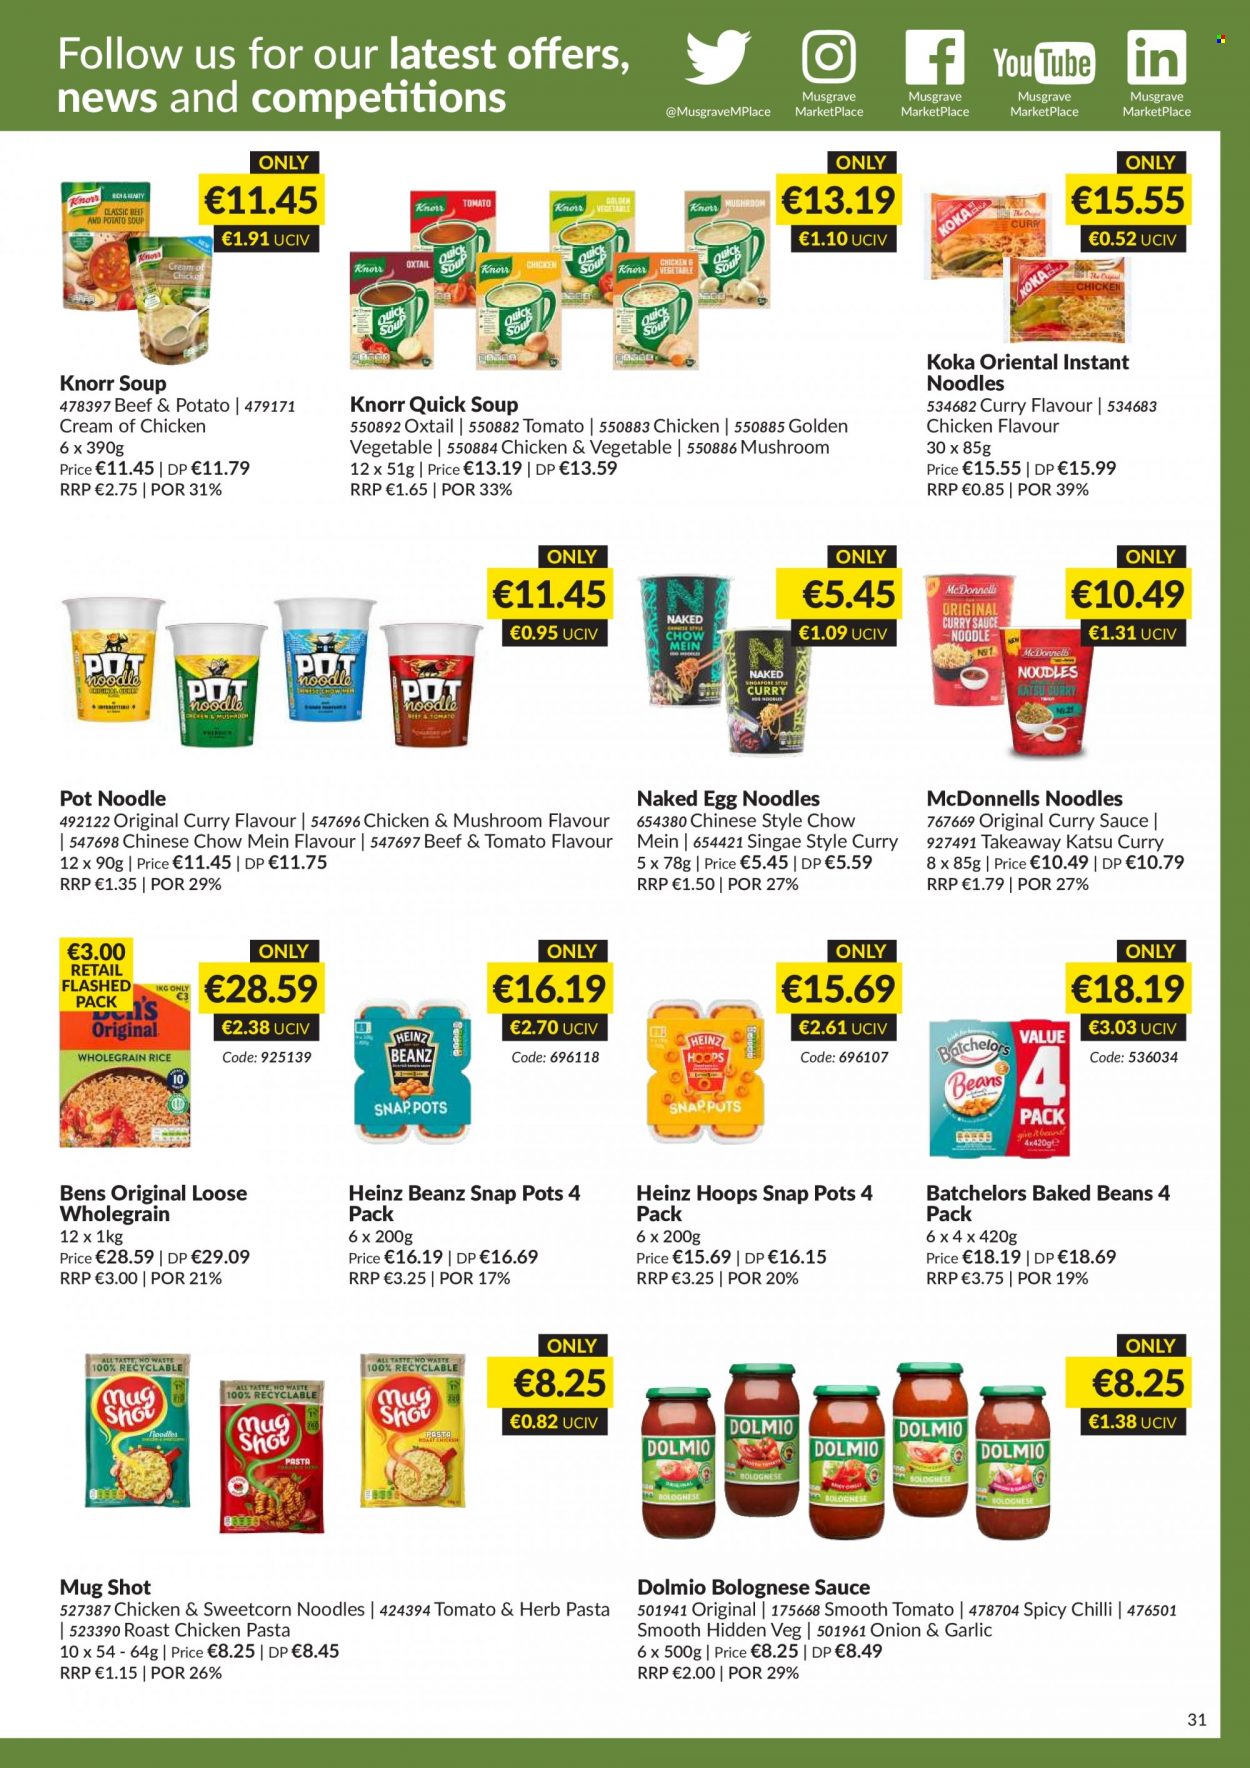 thumbnail - MUSGRAVE Market Place offer  - 31.07.2022 - 27.08.2022 - Sales products - beans, chicken roast, soup, pasta, instant noodles, Knorr, sauce, bolognese sauce, noodles, Heinz, baked beans, egg noodles, curry sauce, beef meat, oxtail, mug. Page 31.